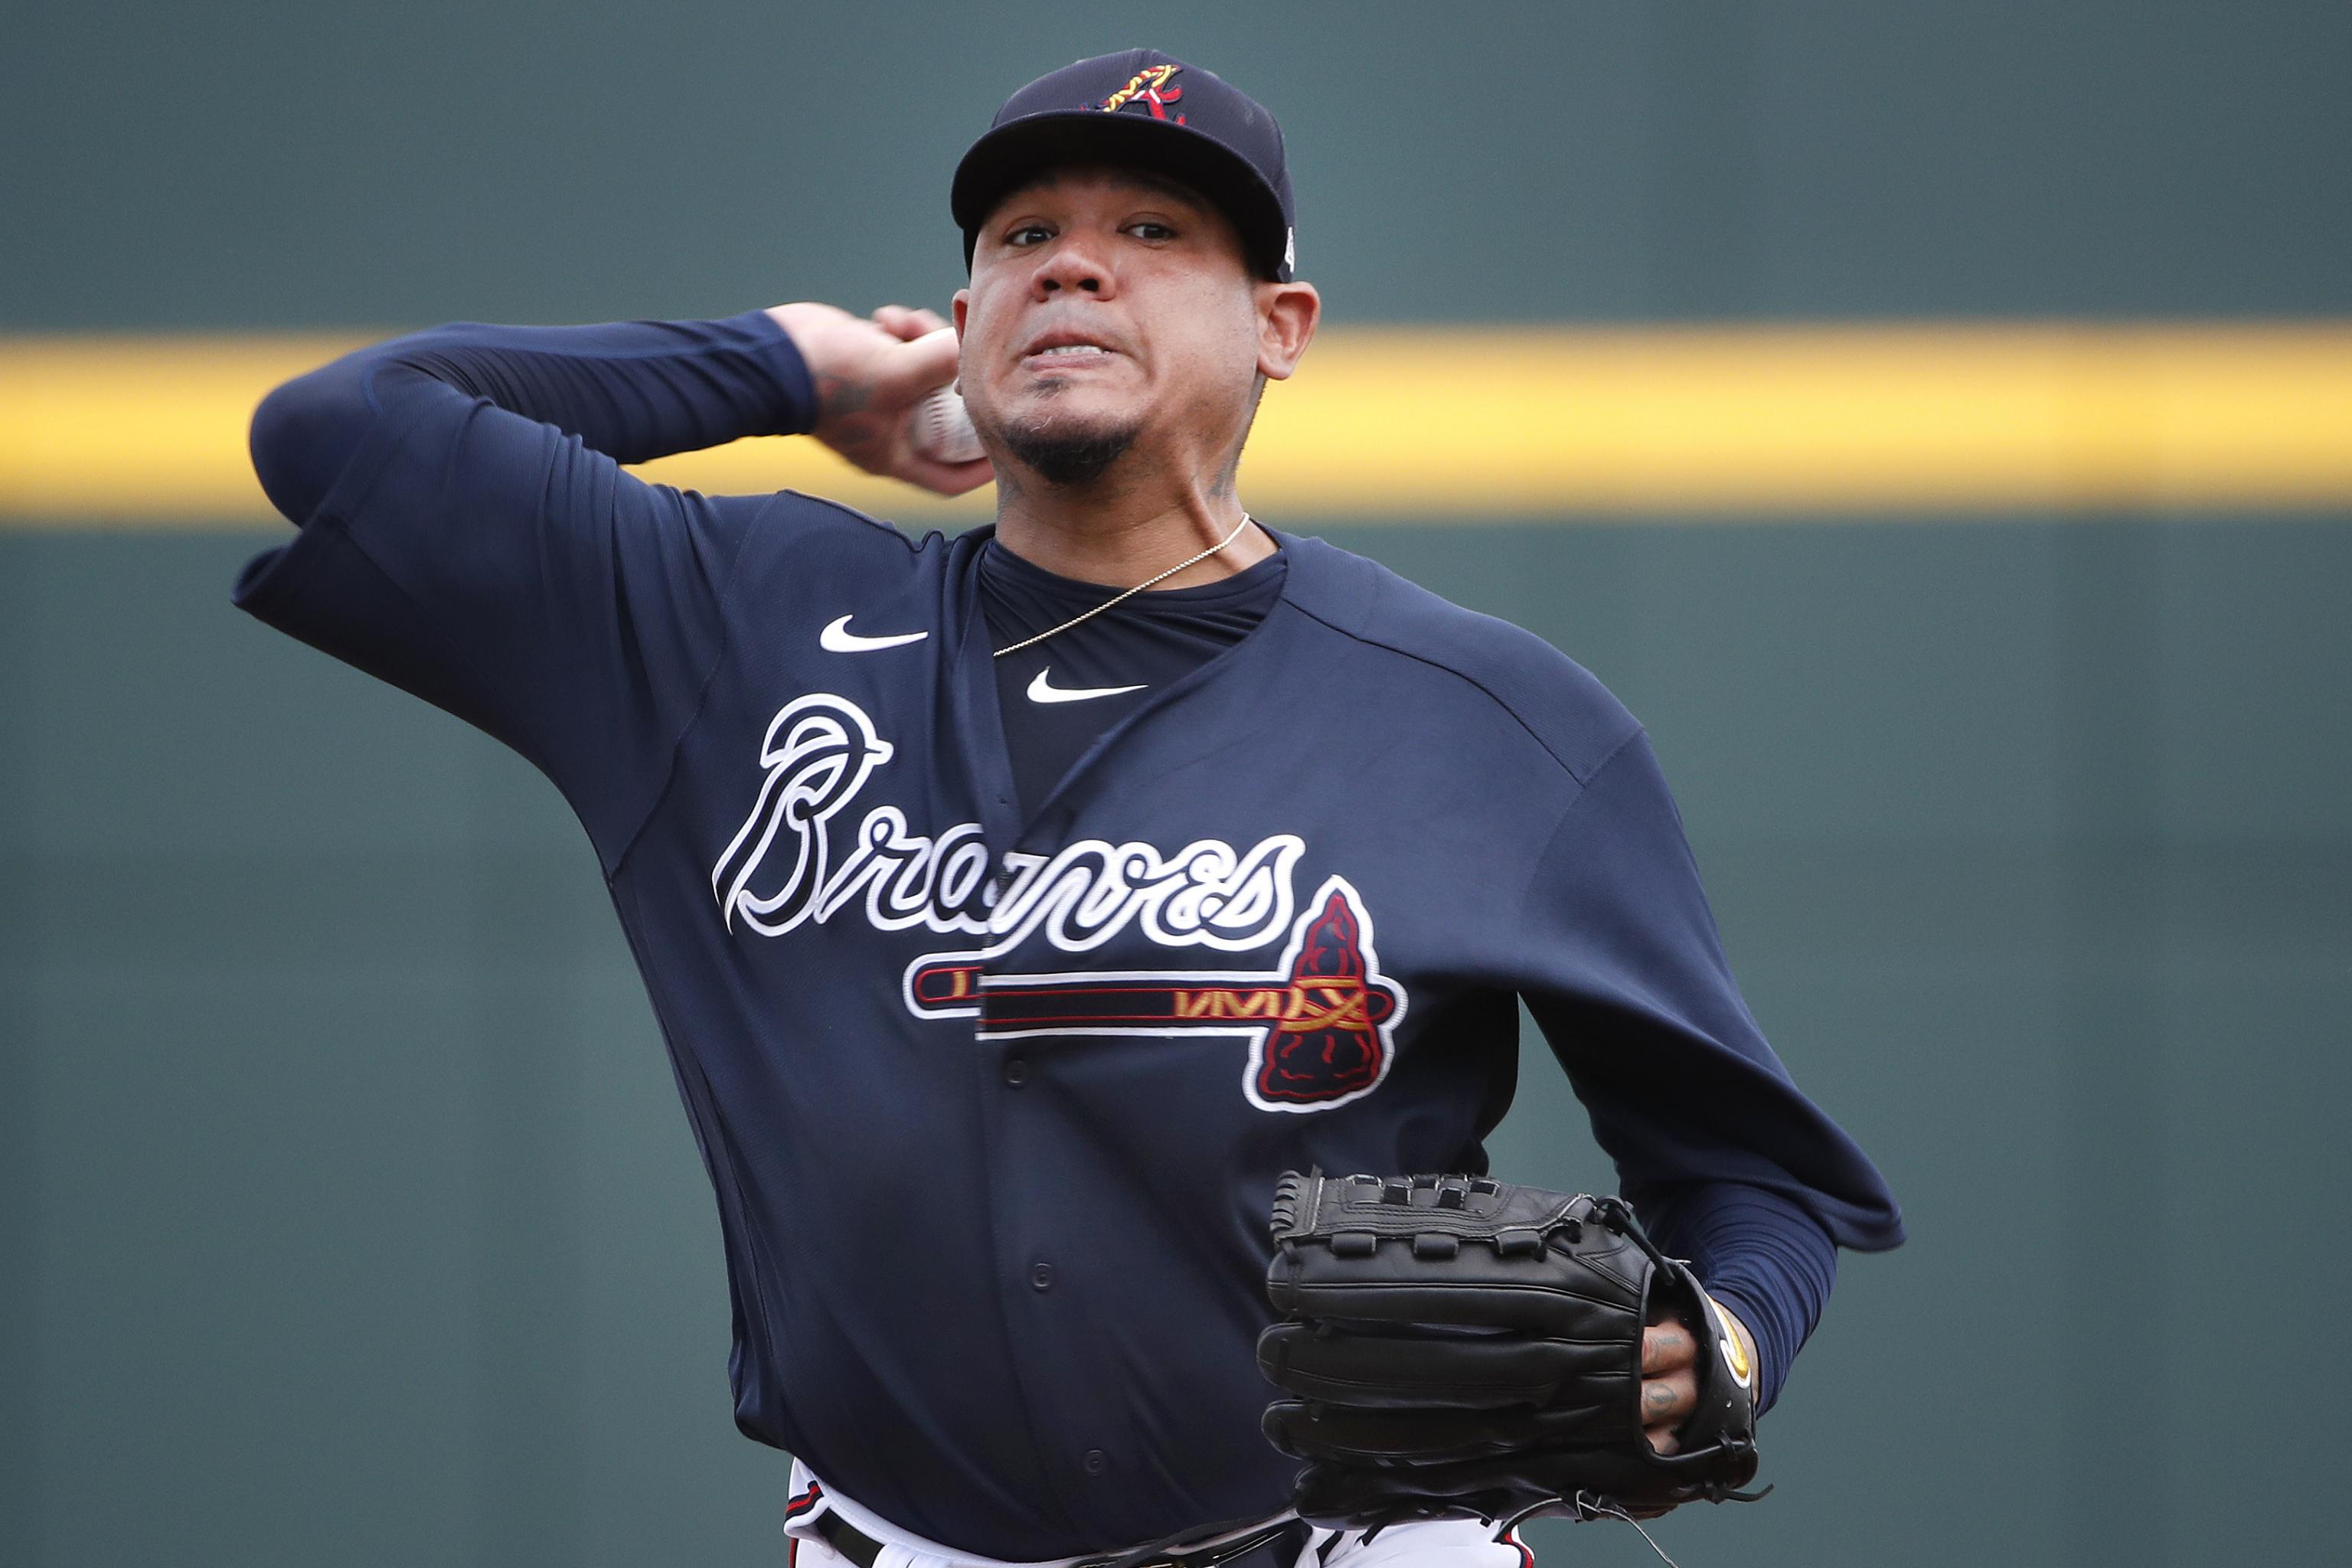 Braves' Felix Hernandez Opts Out Of Season Due To Pandemic